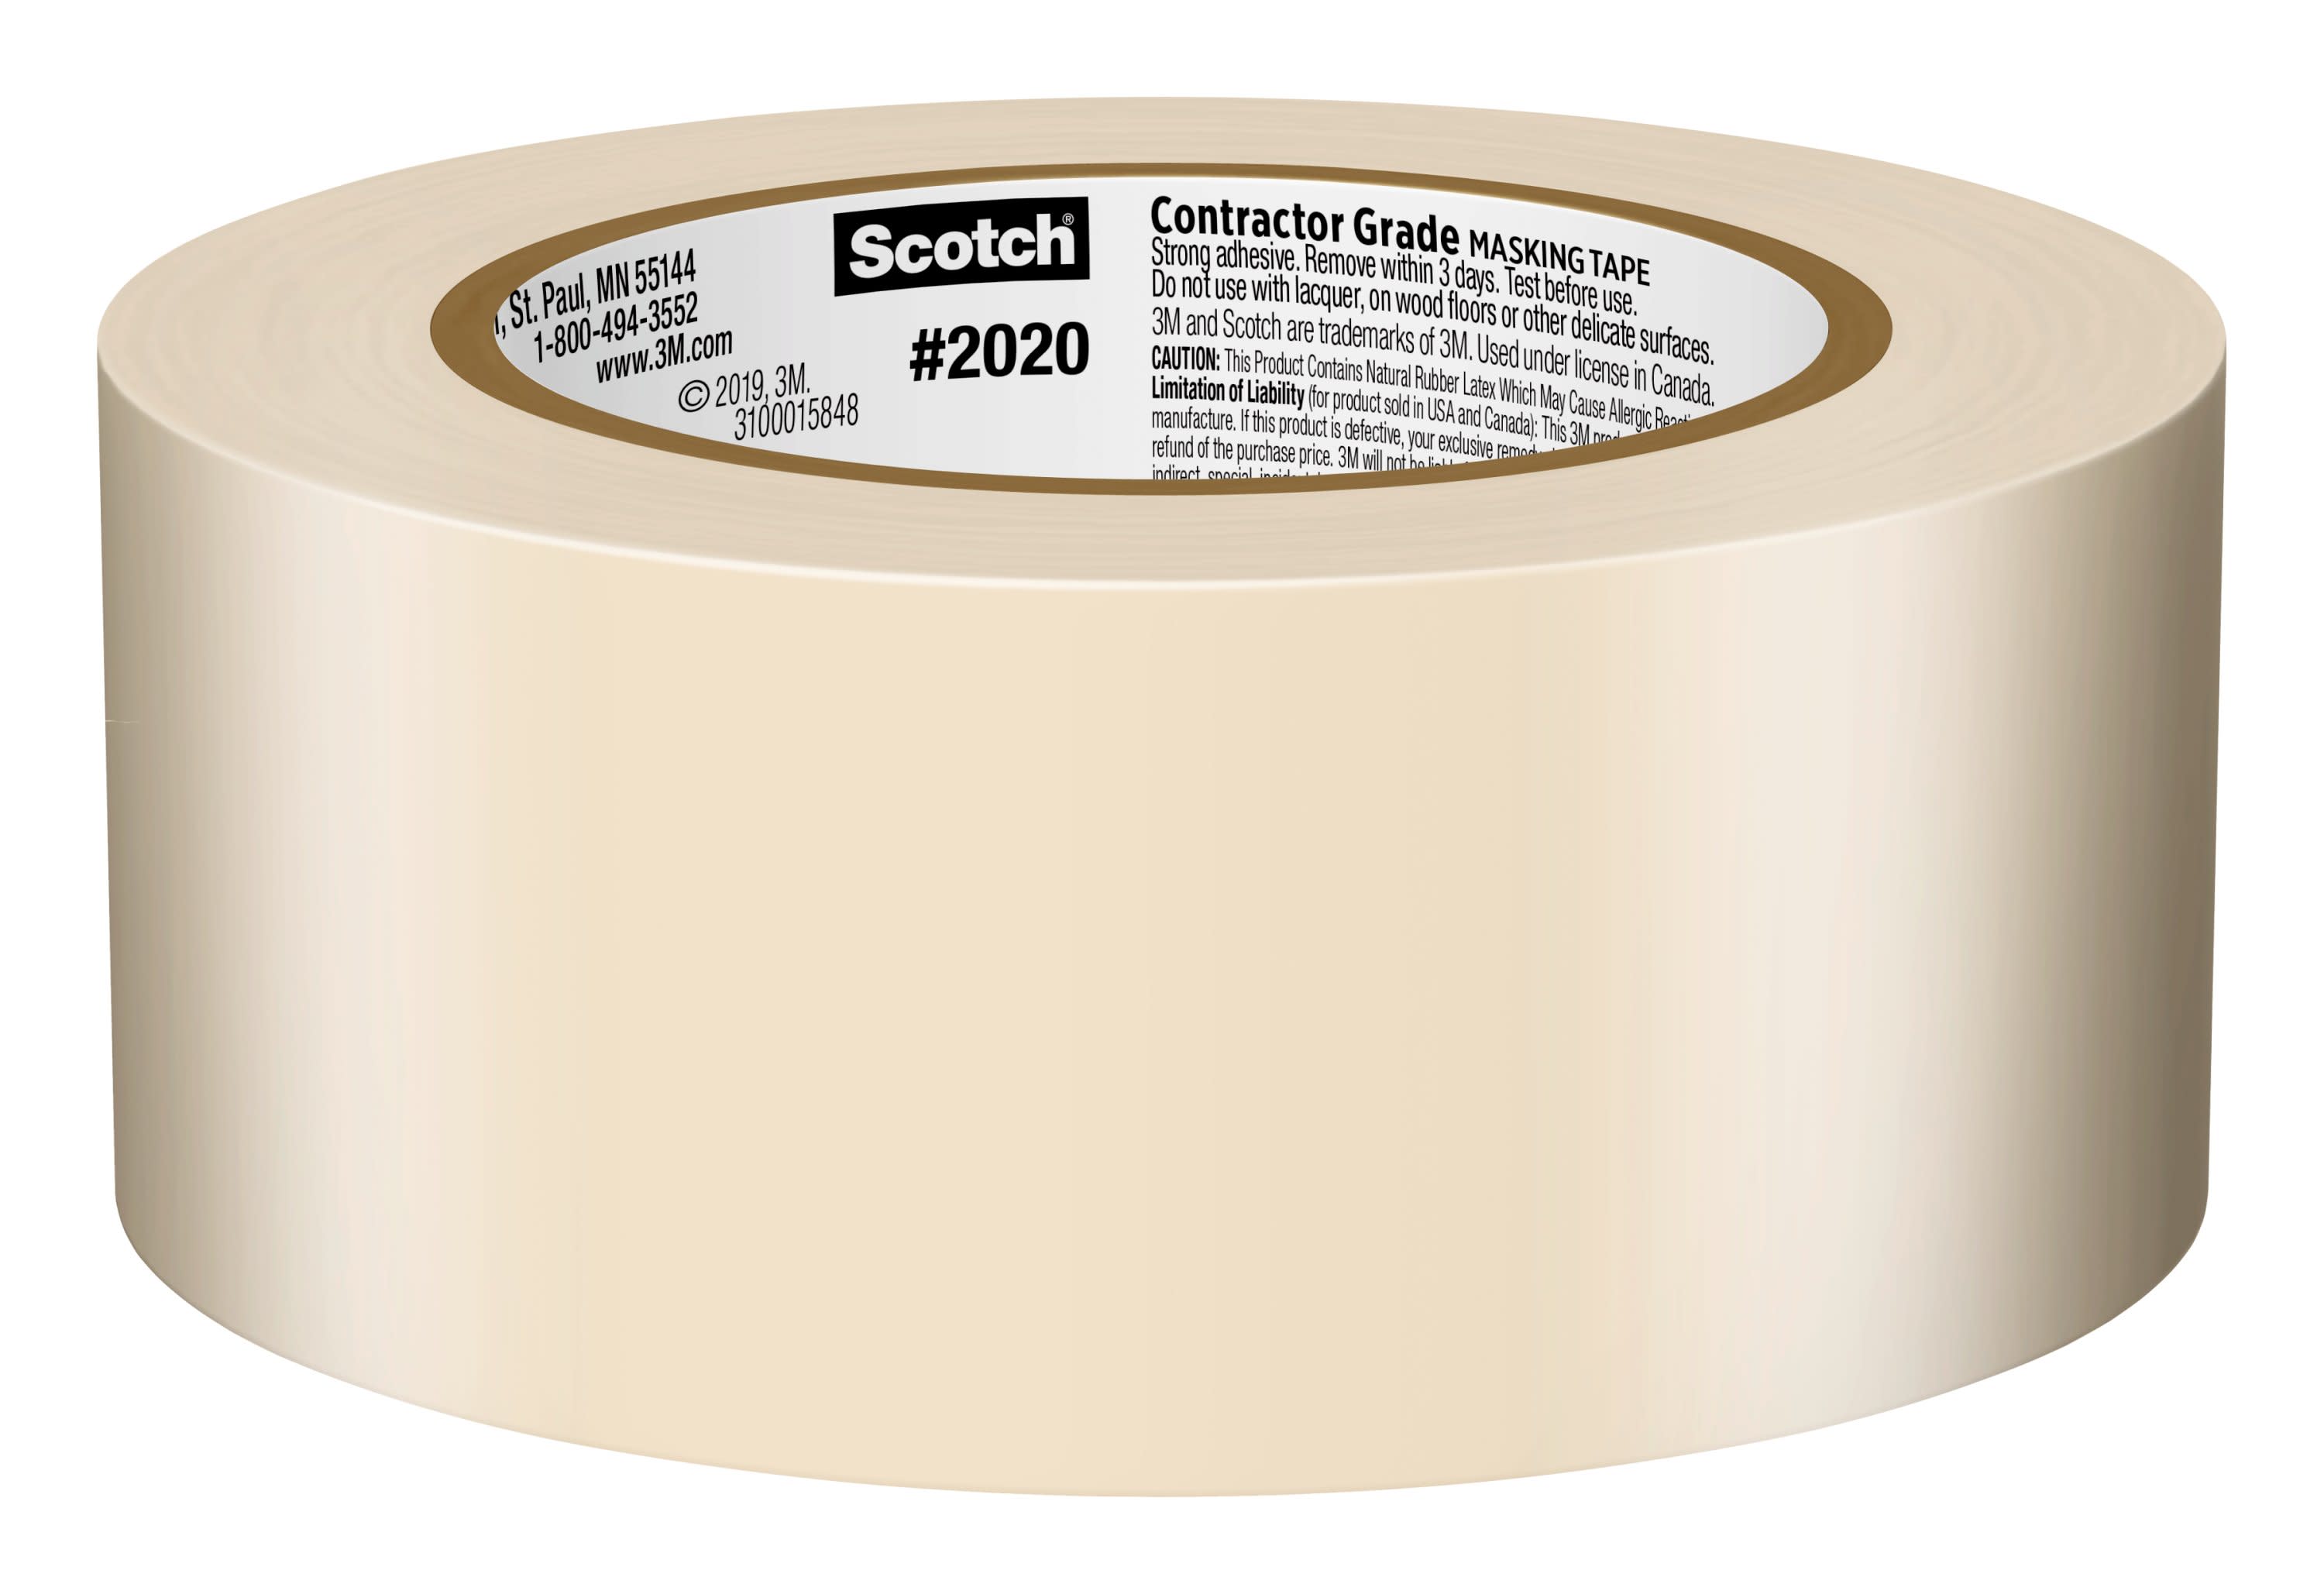 3M 021200410826 Painter's Masking Tape, 1.8 x 60 Yd - 6 pack